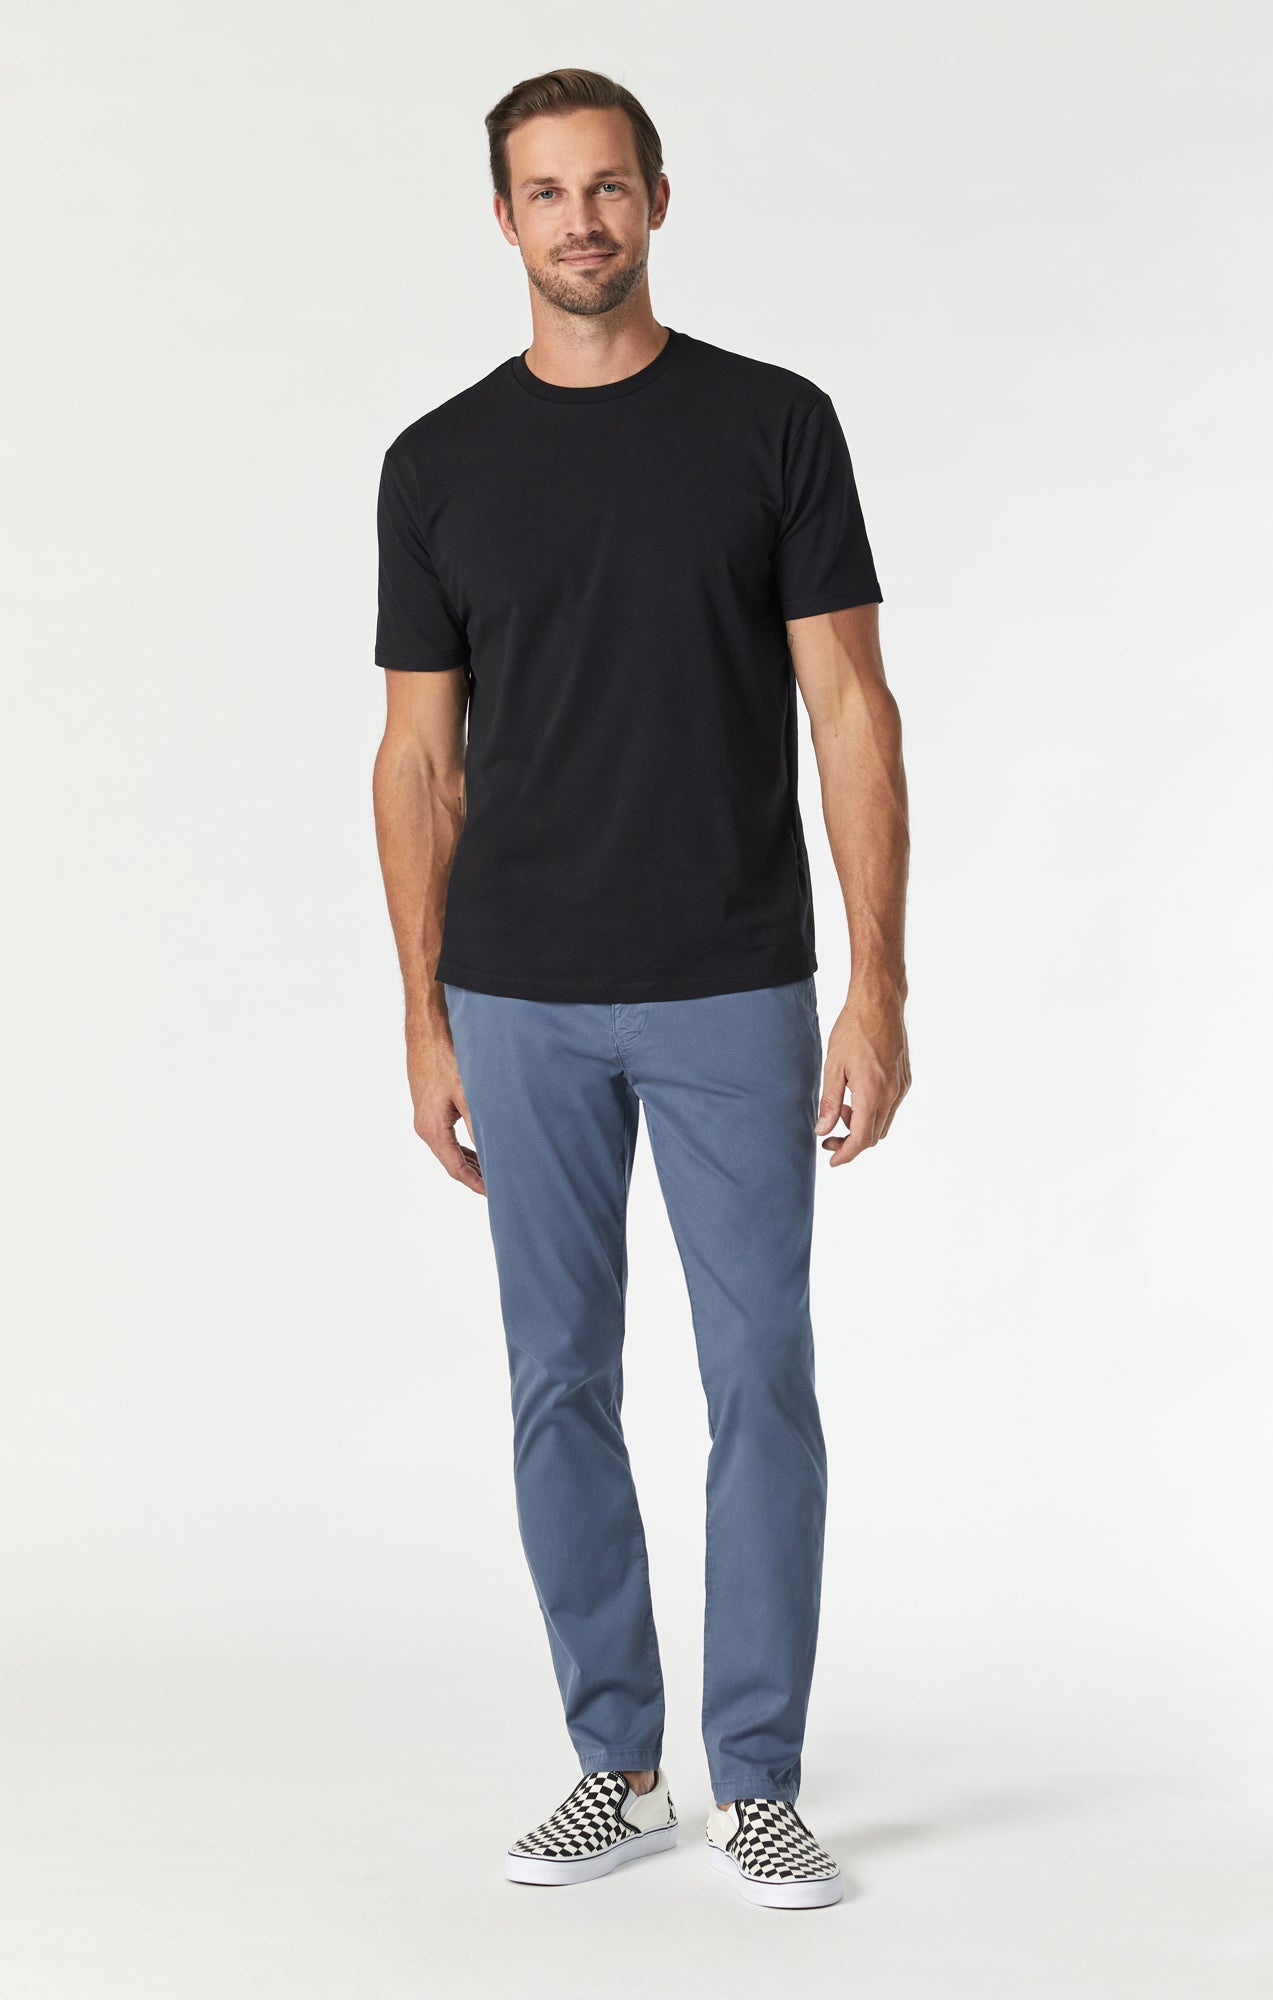 Up to 50% Off lululemon Men's Clothing + Free Shipping, Tees, Shorts,  Pants & More